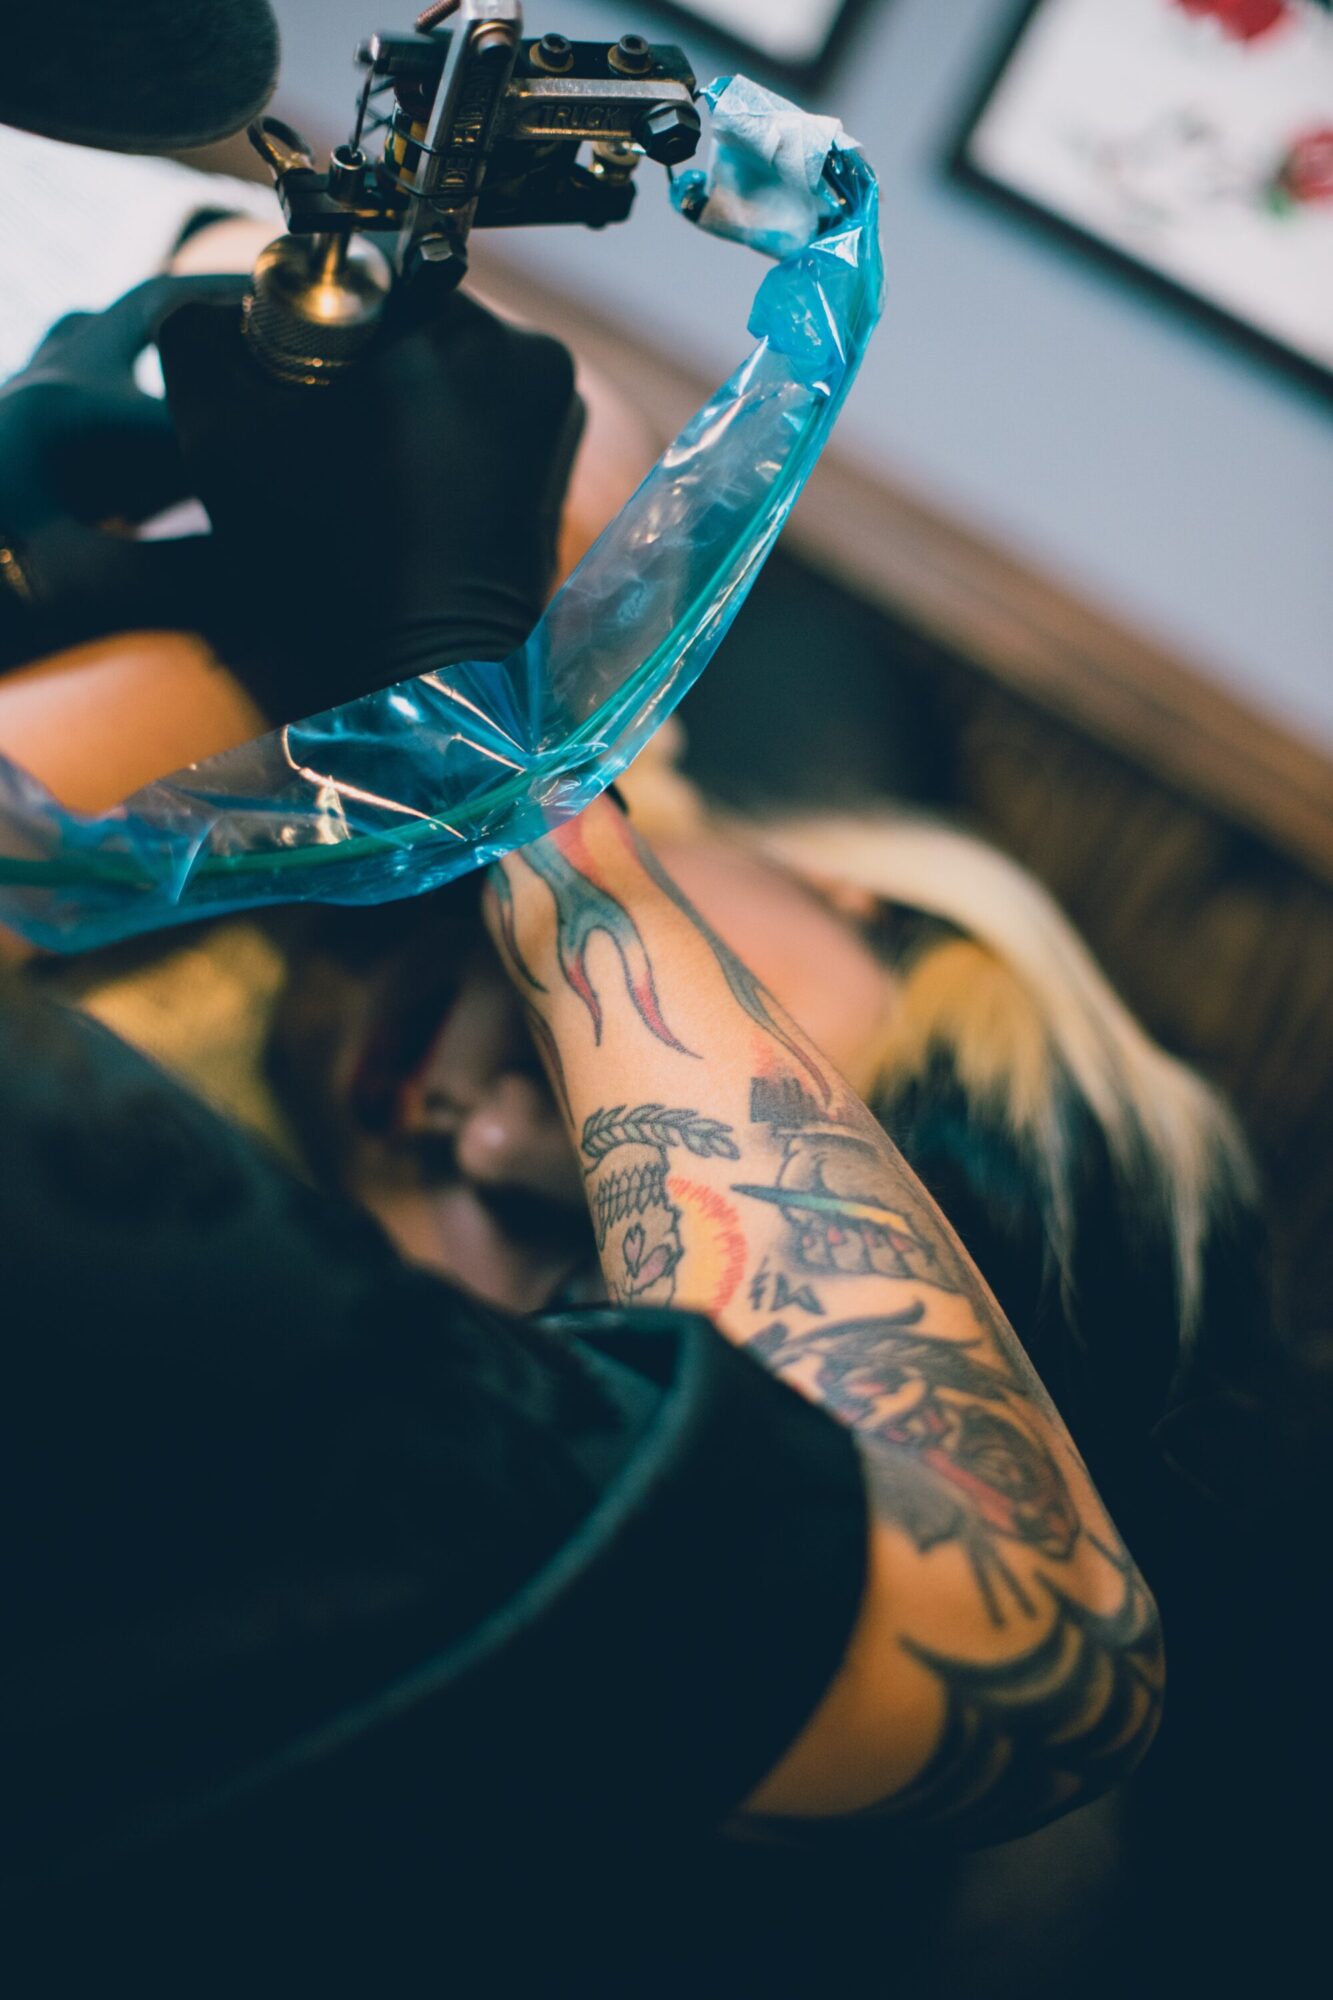 Tattoo artist - online booking system that is easy to use